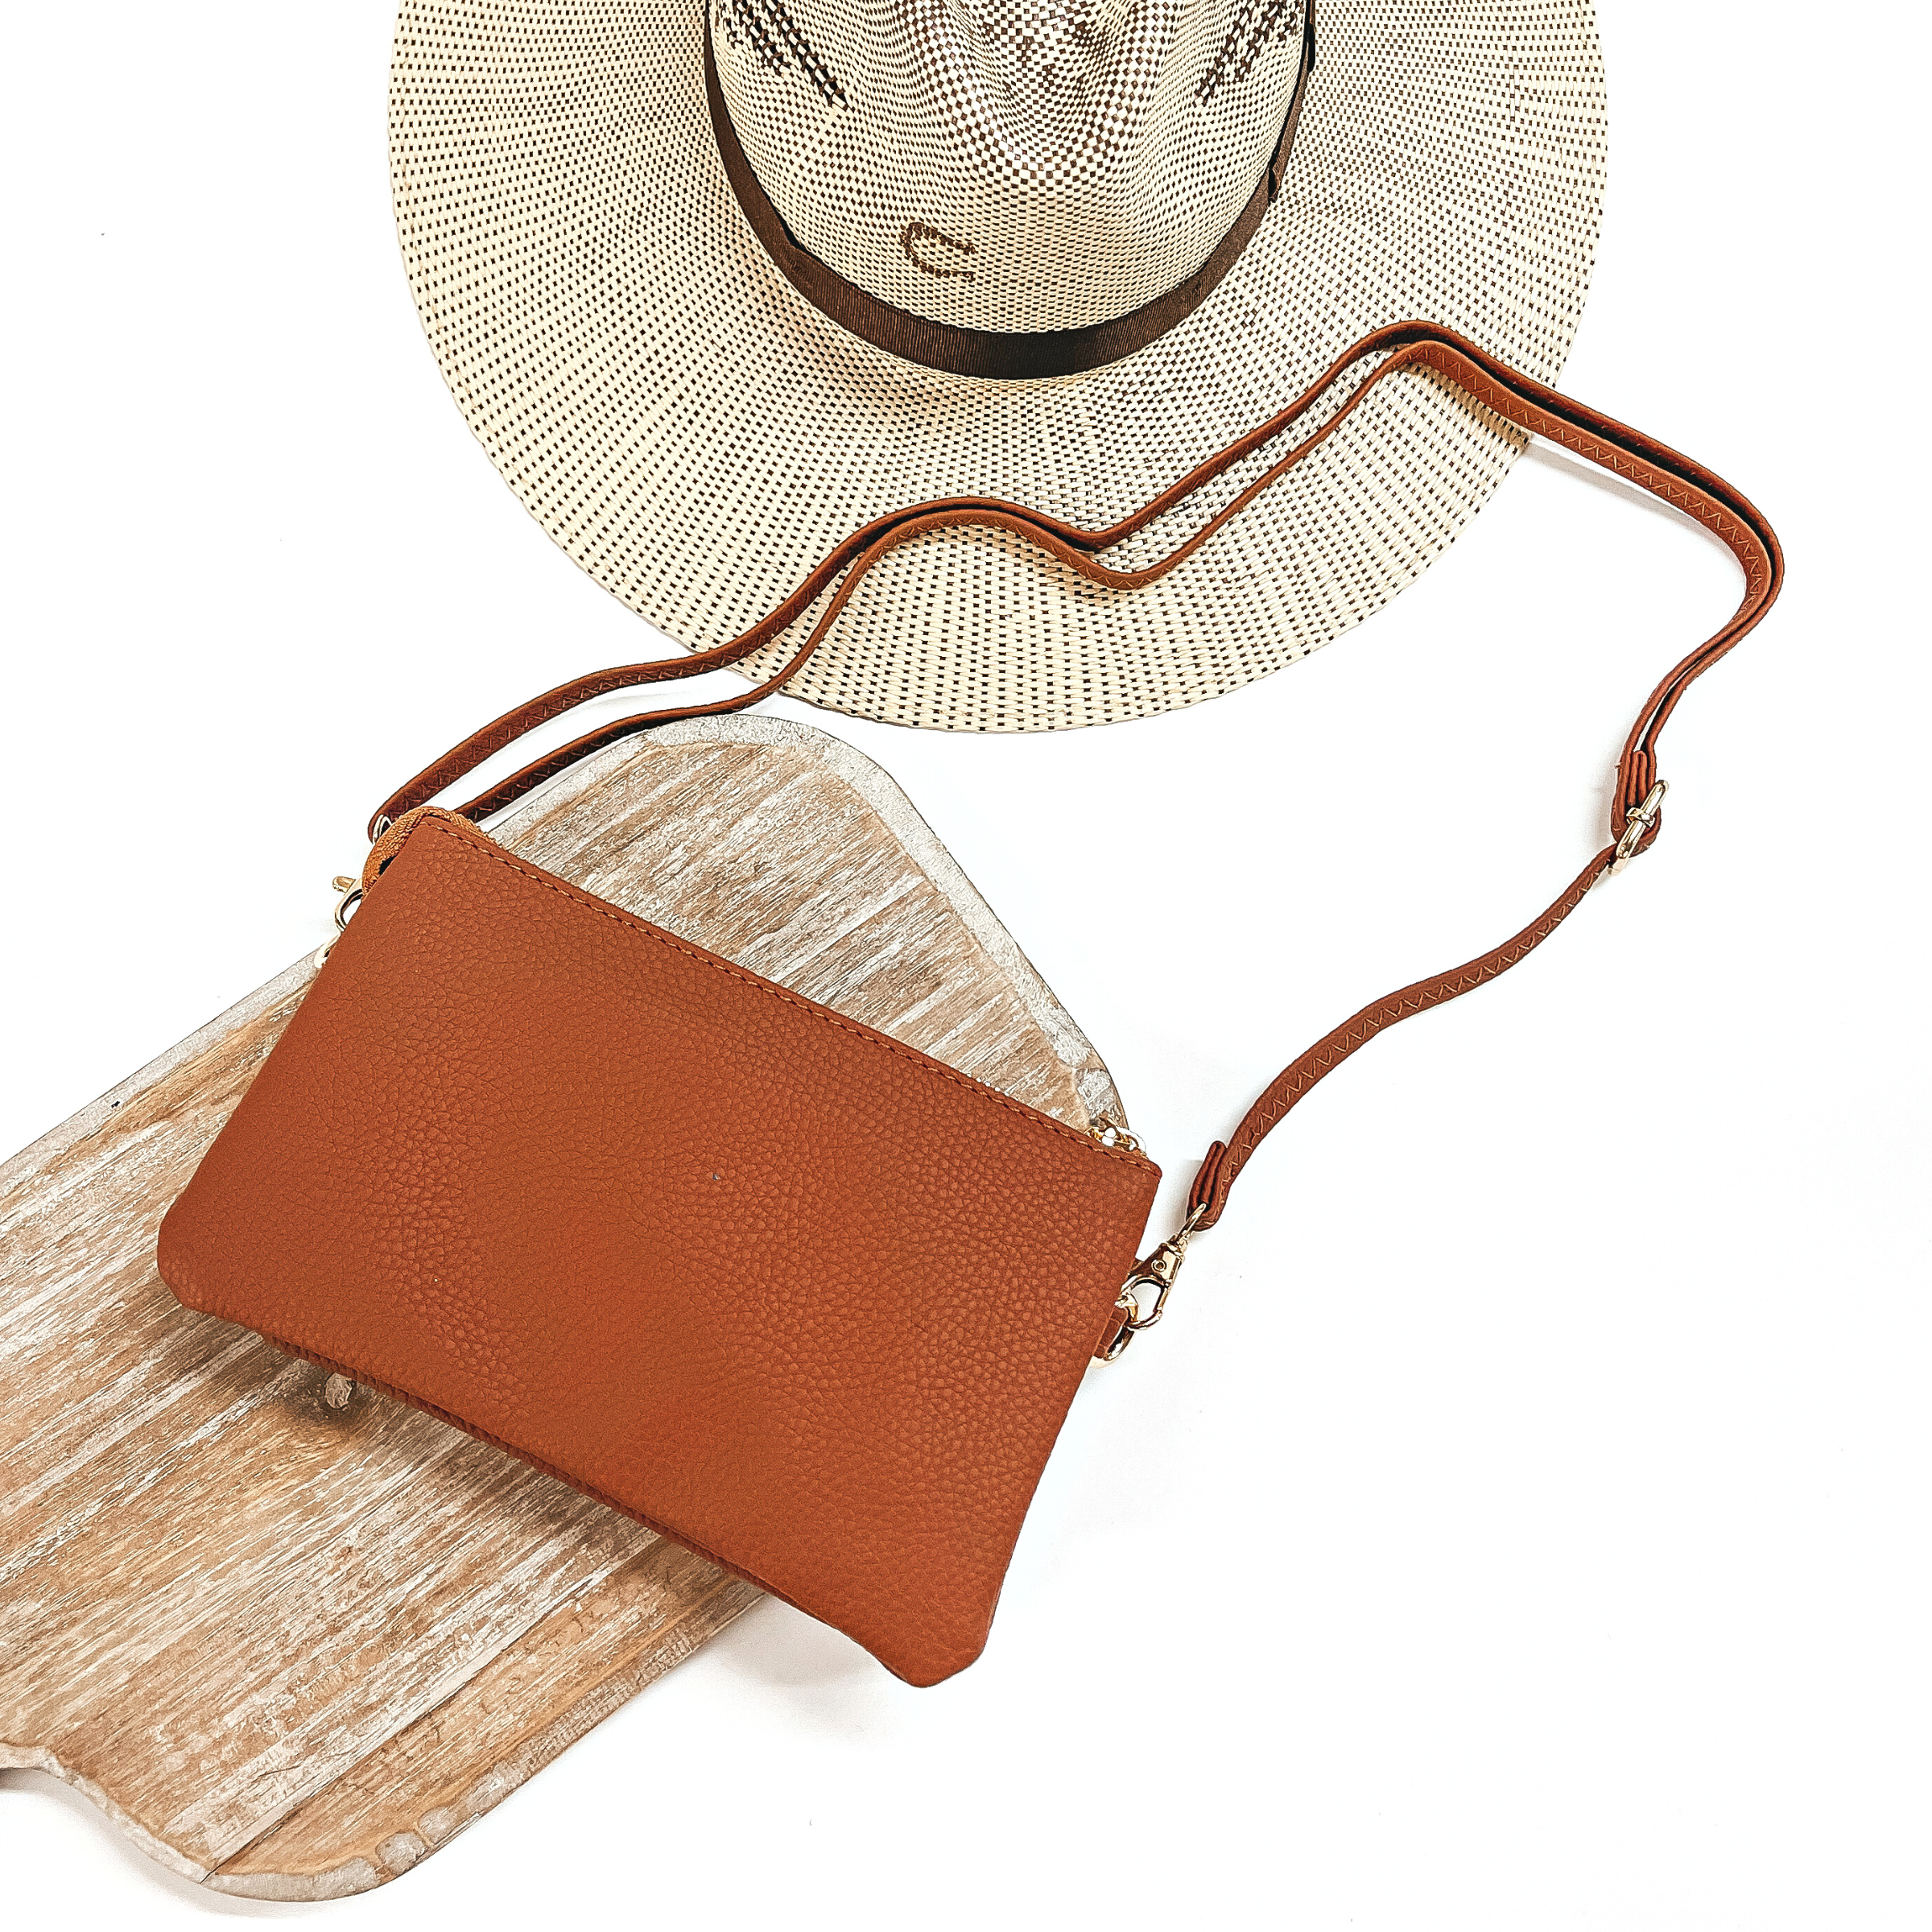 Dashing Darling Zip-Around Wallet with Removeable Strap in Tan - Giddy Up Glamour Boutique